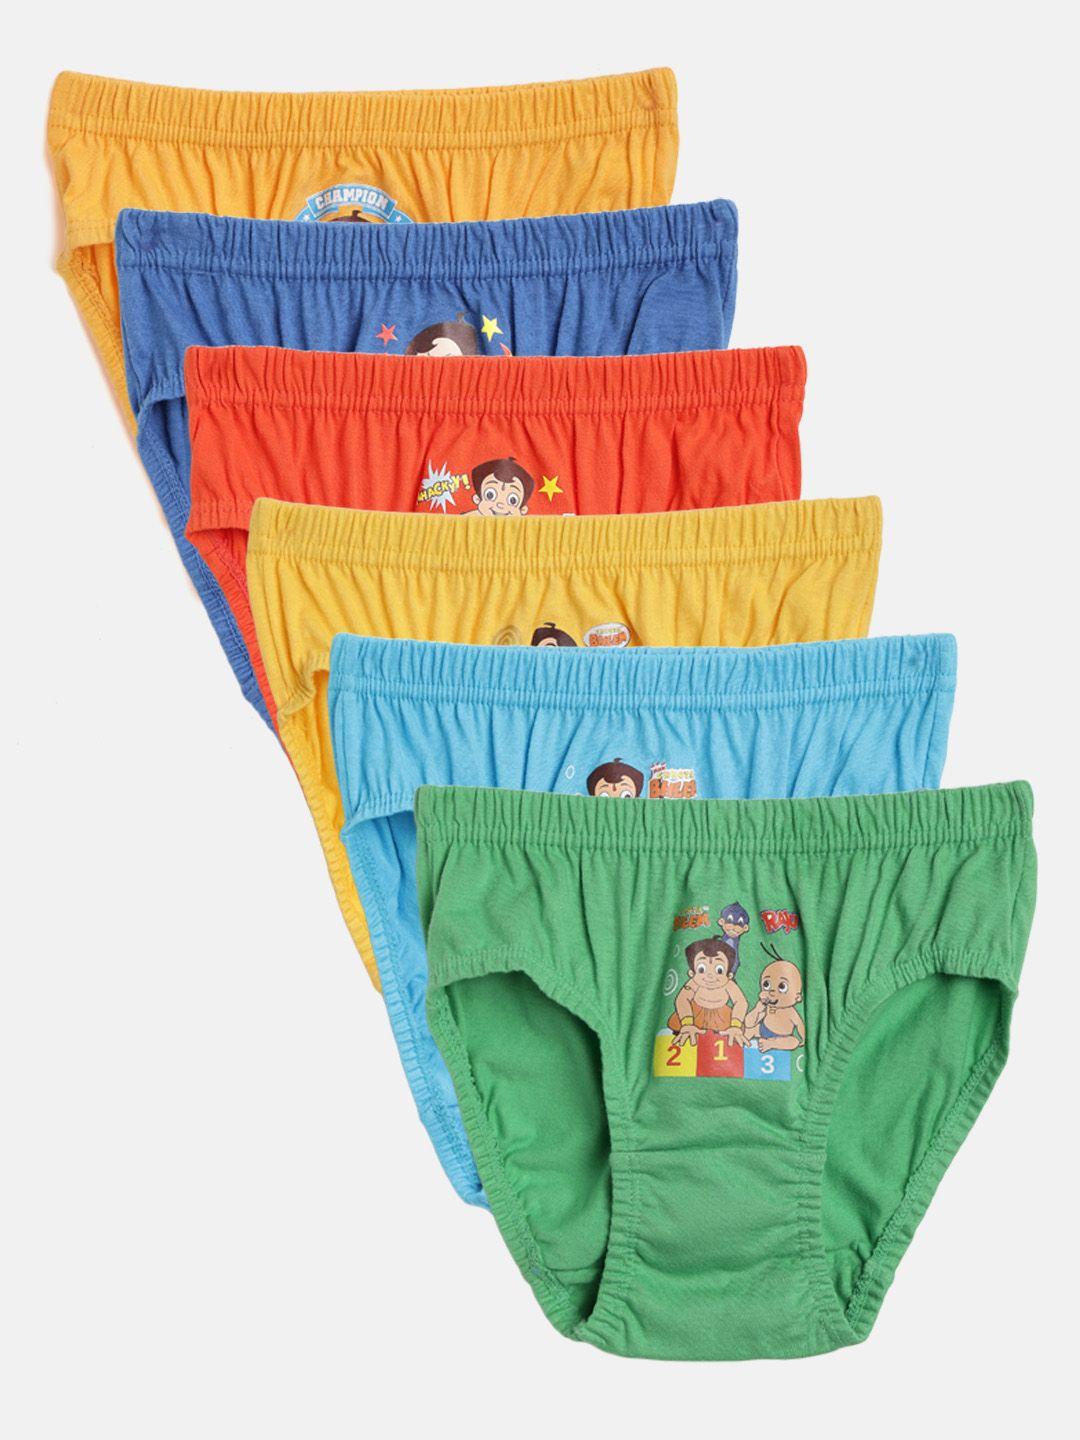 bodycare kids boys pack of 6 assorted briefs 964abcdef-65